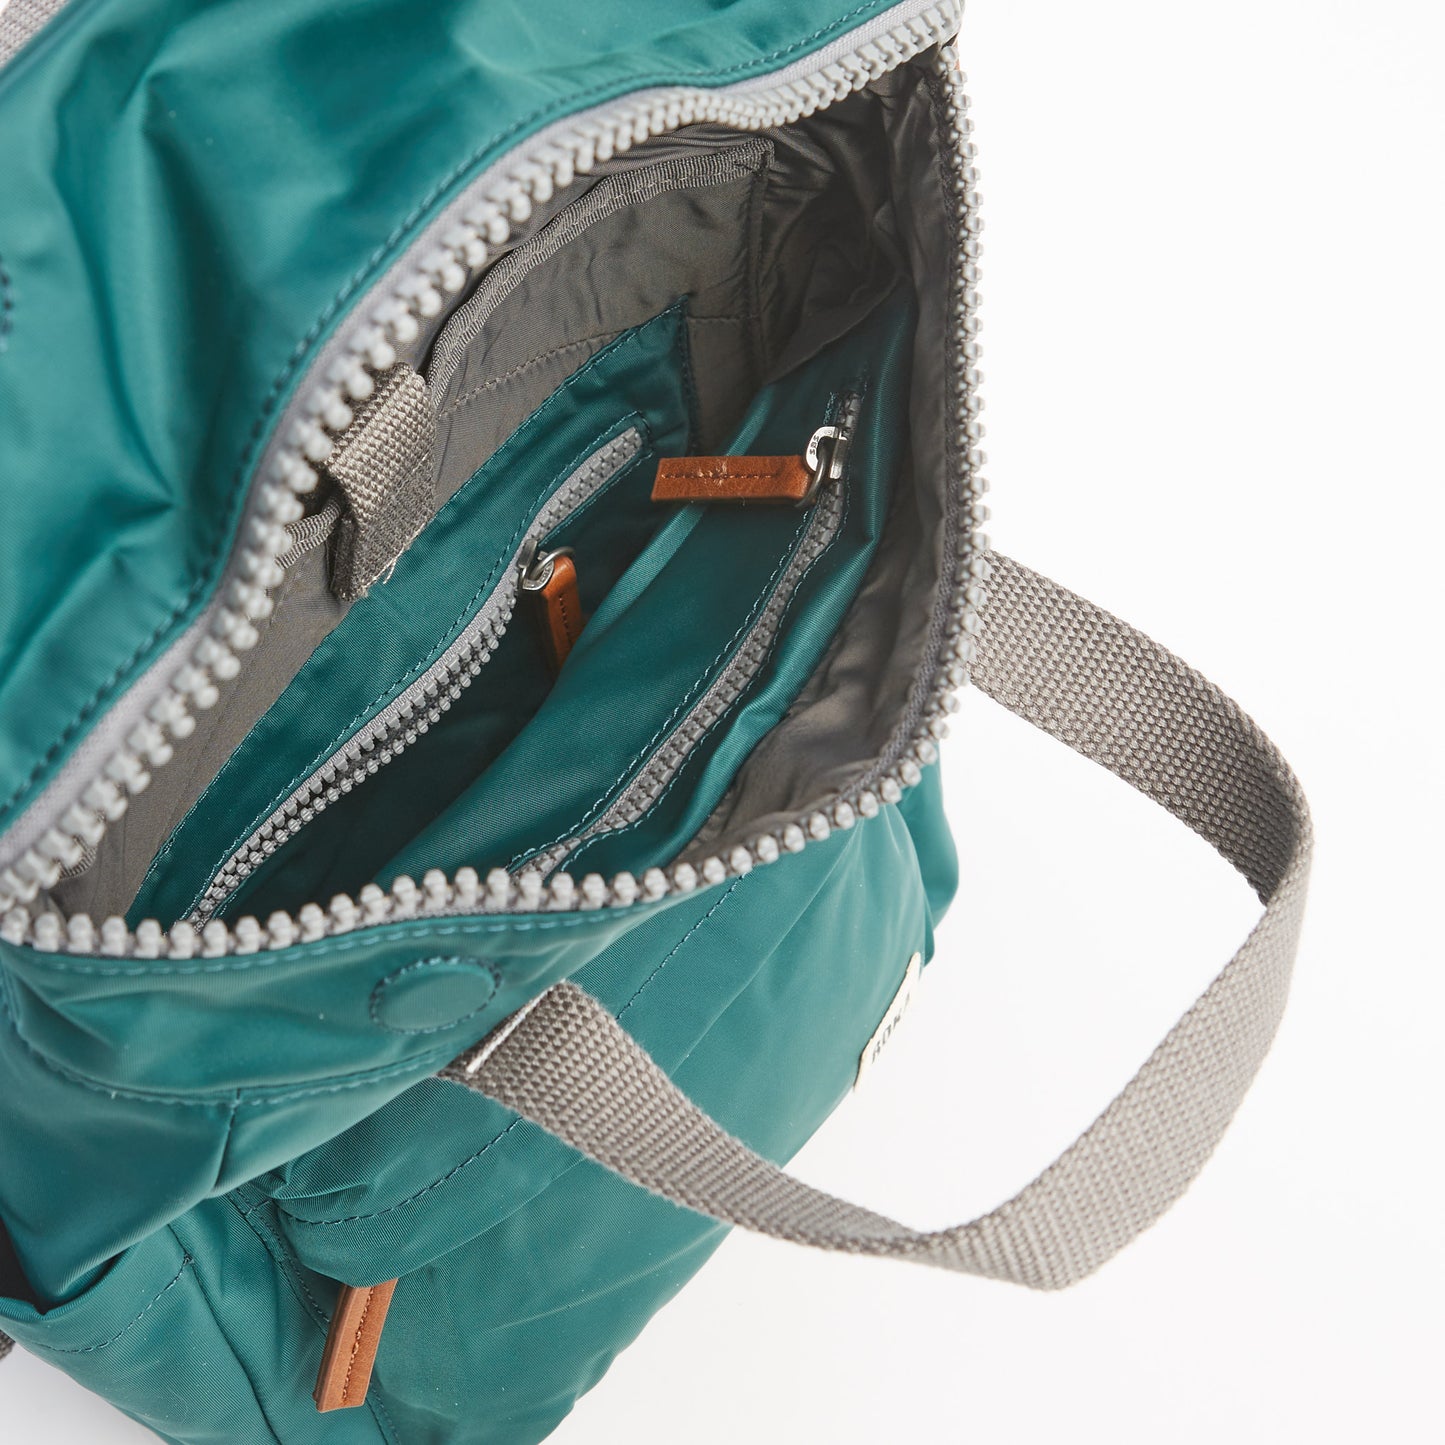 Canfield Small Rucksack